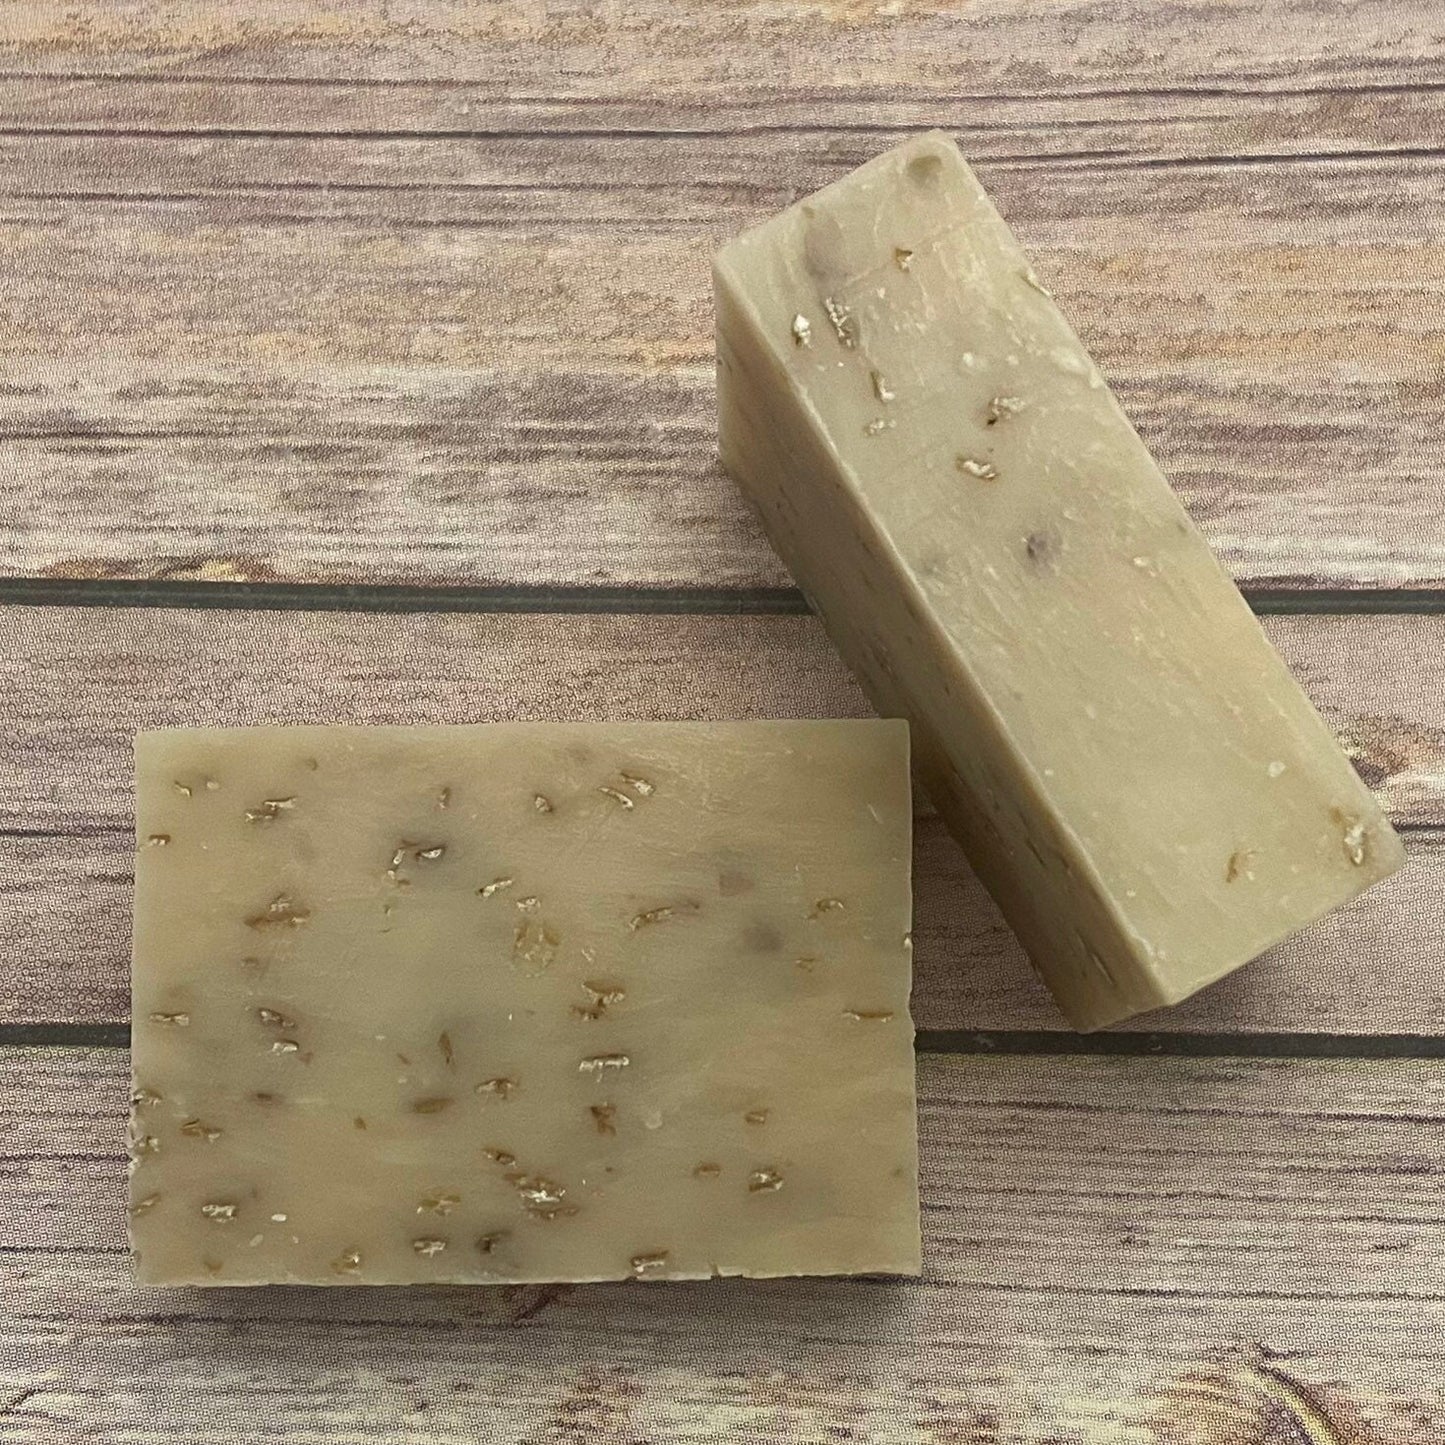 Ivy Creek Oatmeal Goat Milk Soap | Gentle and Unscented Natural Soap | Nourishing Soap Bar - 4 oz